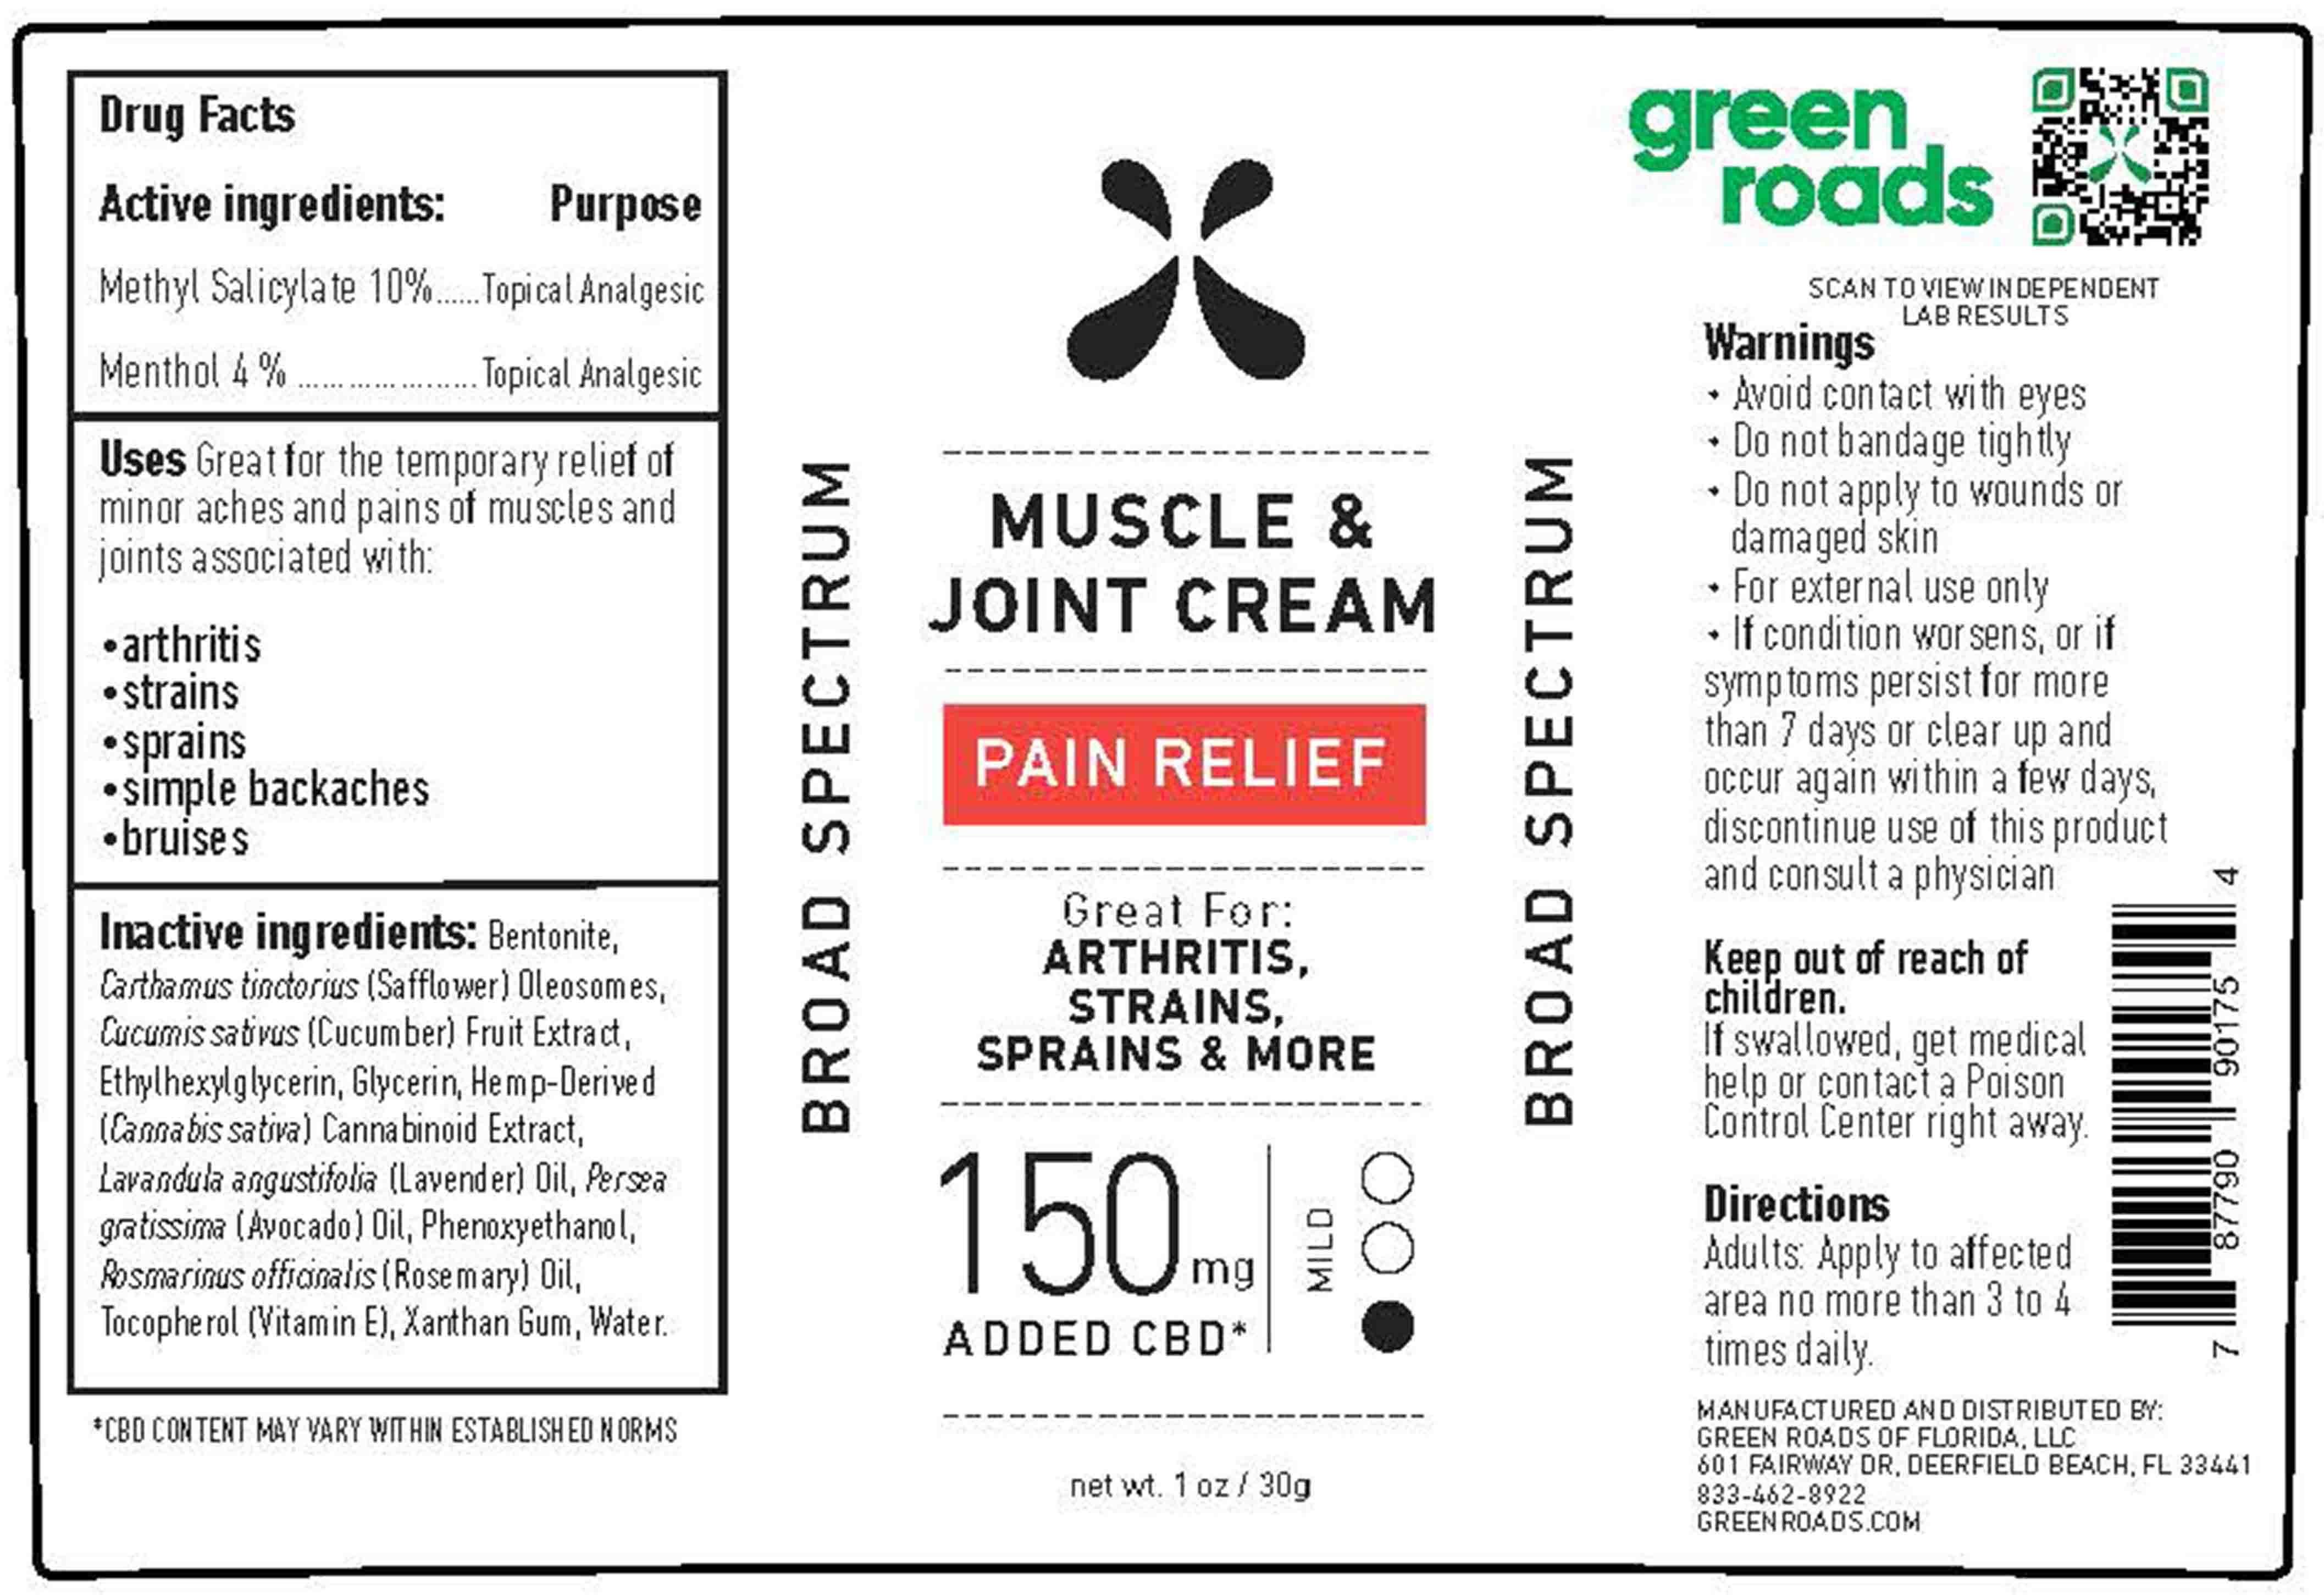 Joint and Muscle Pain Relief Balm - New Spectrum Labs